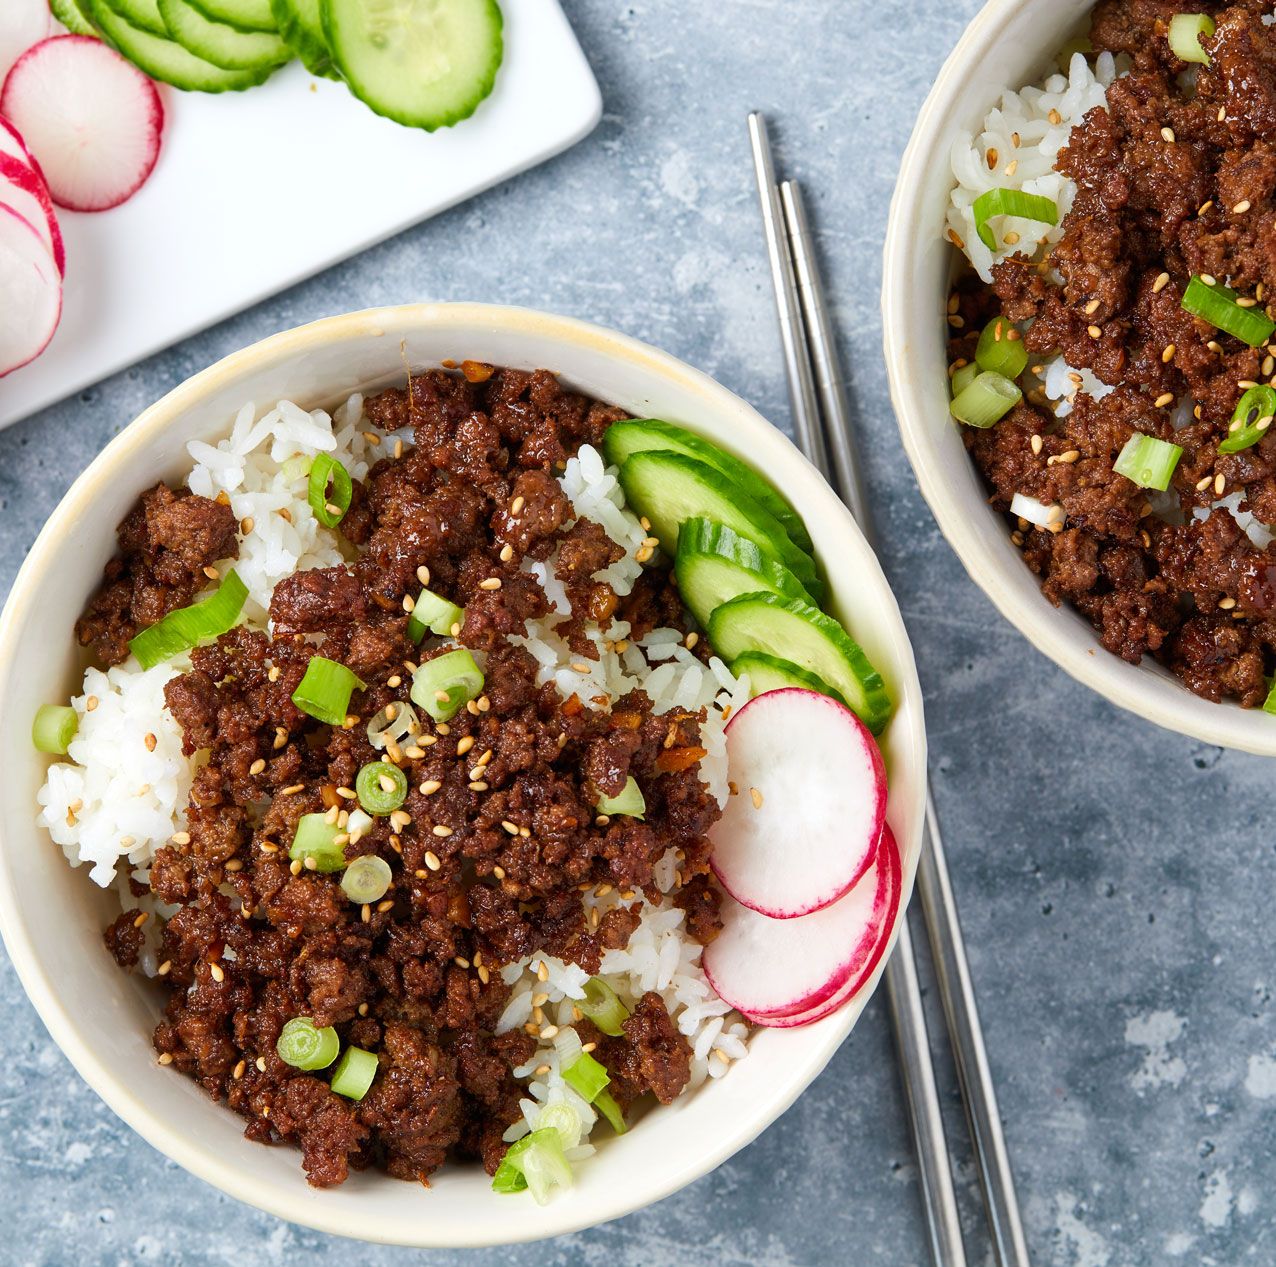 Caramelized Ground Beef With Rice Is Our New Favorite 10-Minute Dinner